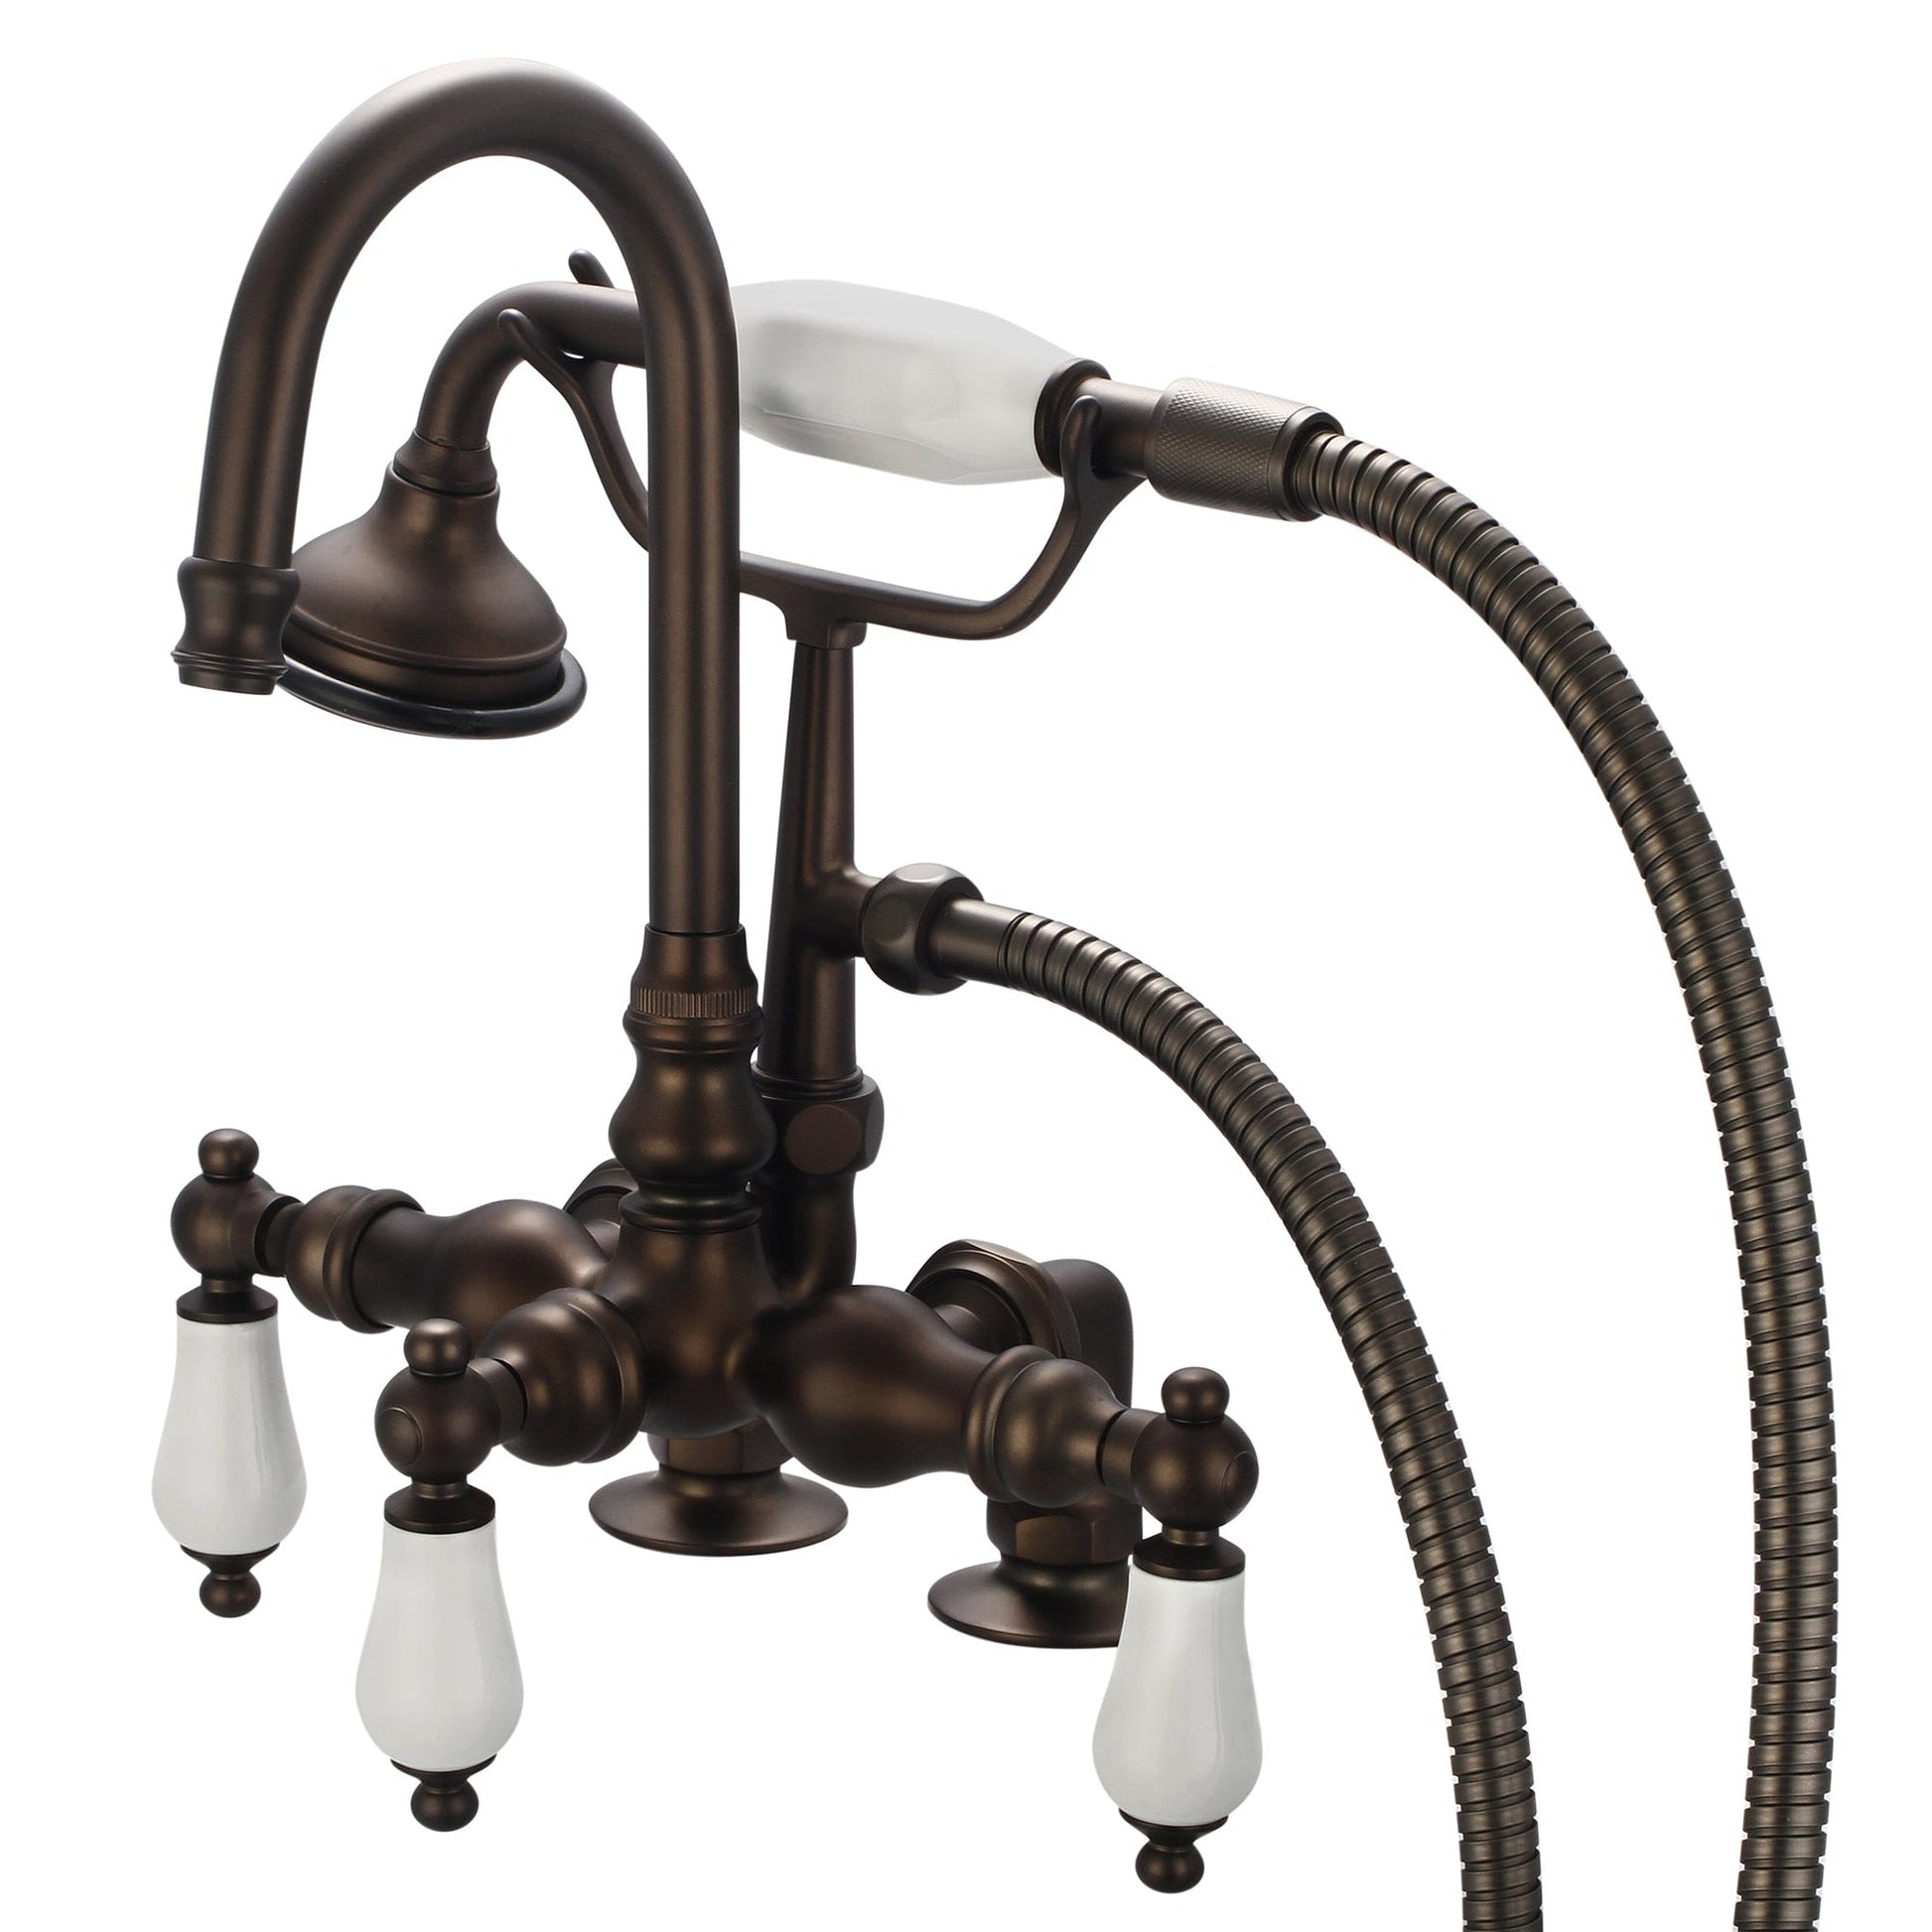 Water Creation Vintage Classic Center Deck Mount Tub F6-0013 9.25" Brown Solid Brass Faucet With Gooseneck Spout, 2-Inch Risers And Handheld Shower And Porcelain Lever Handles Without Labels